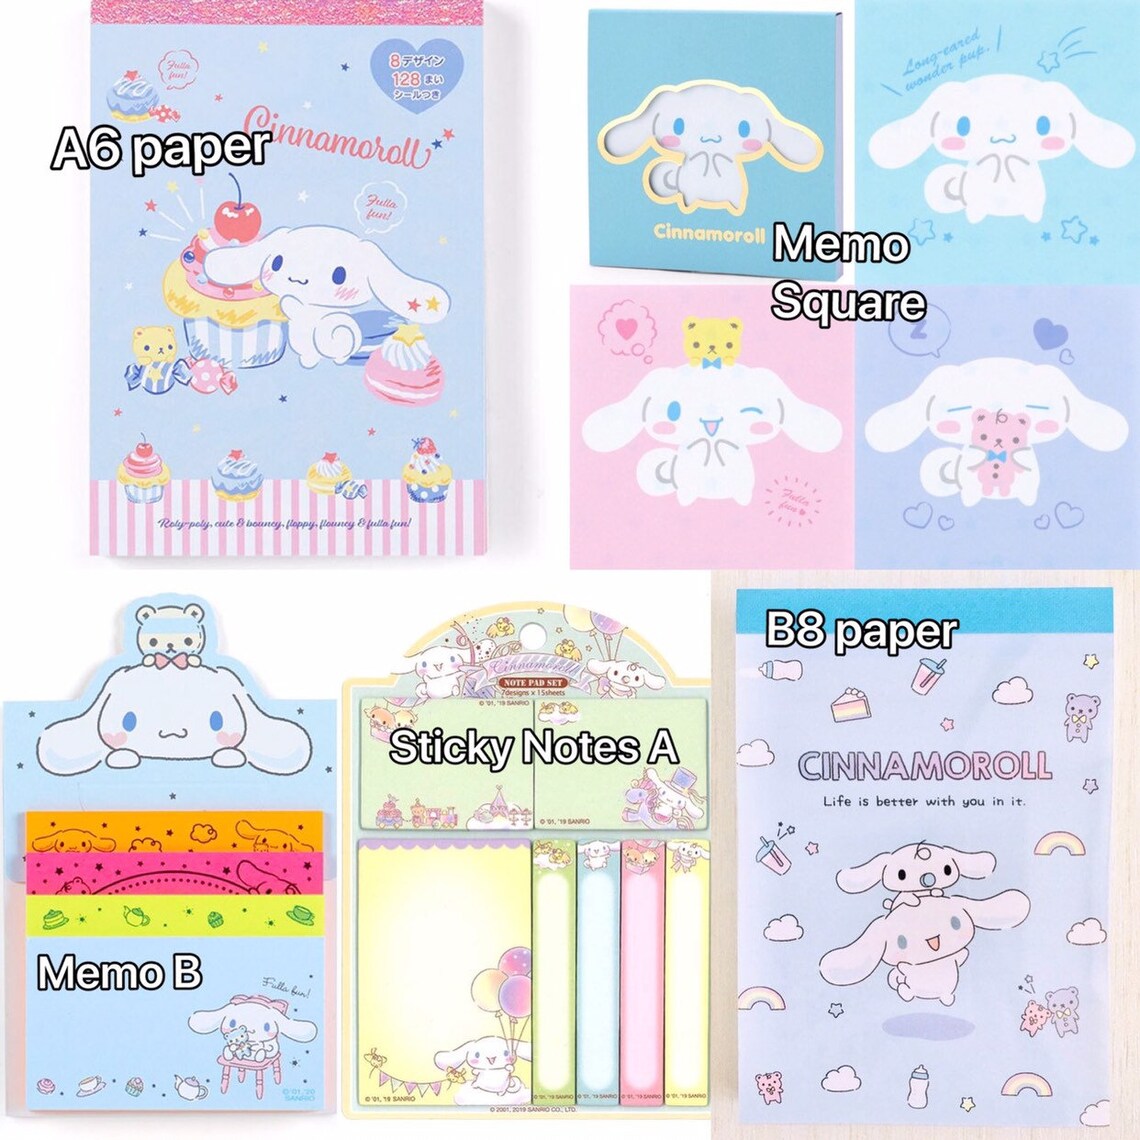 Japan Notebook Paper Notepad Cinnamoroll Sticky Notes Memo A6 - Etsy